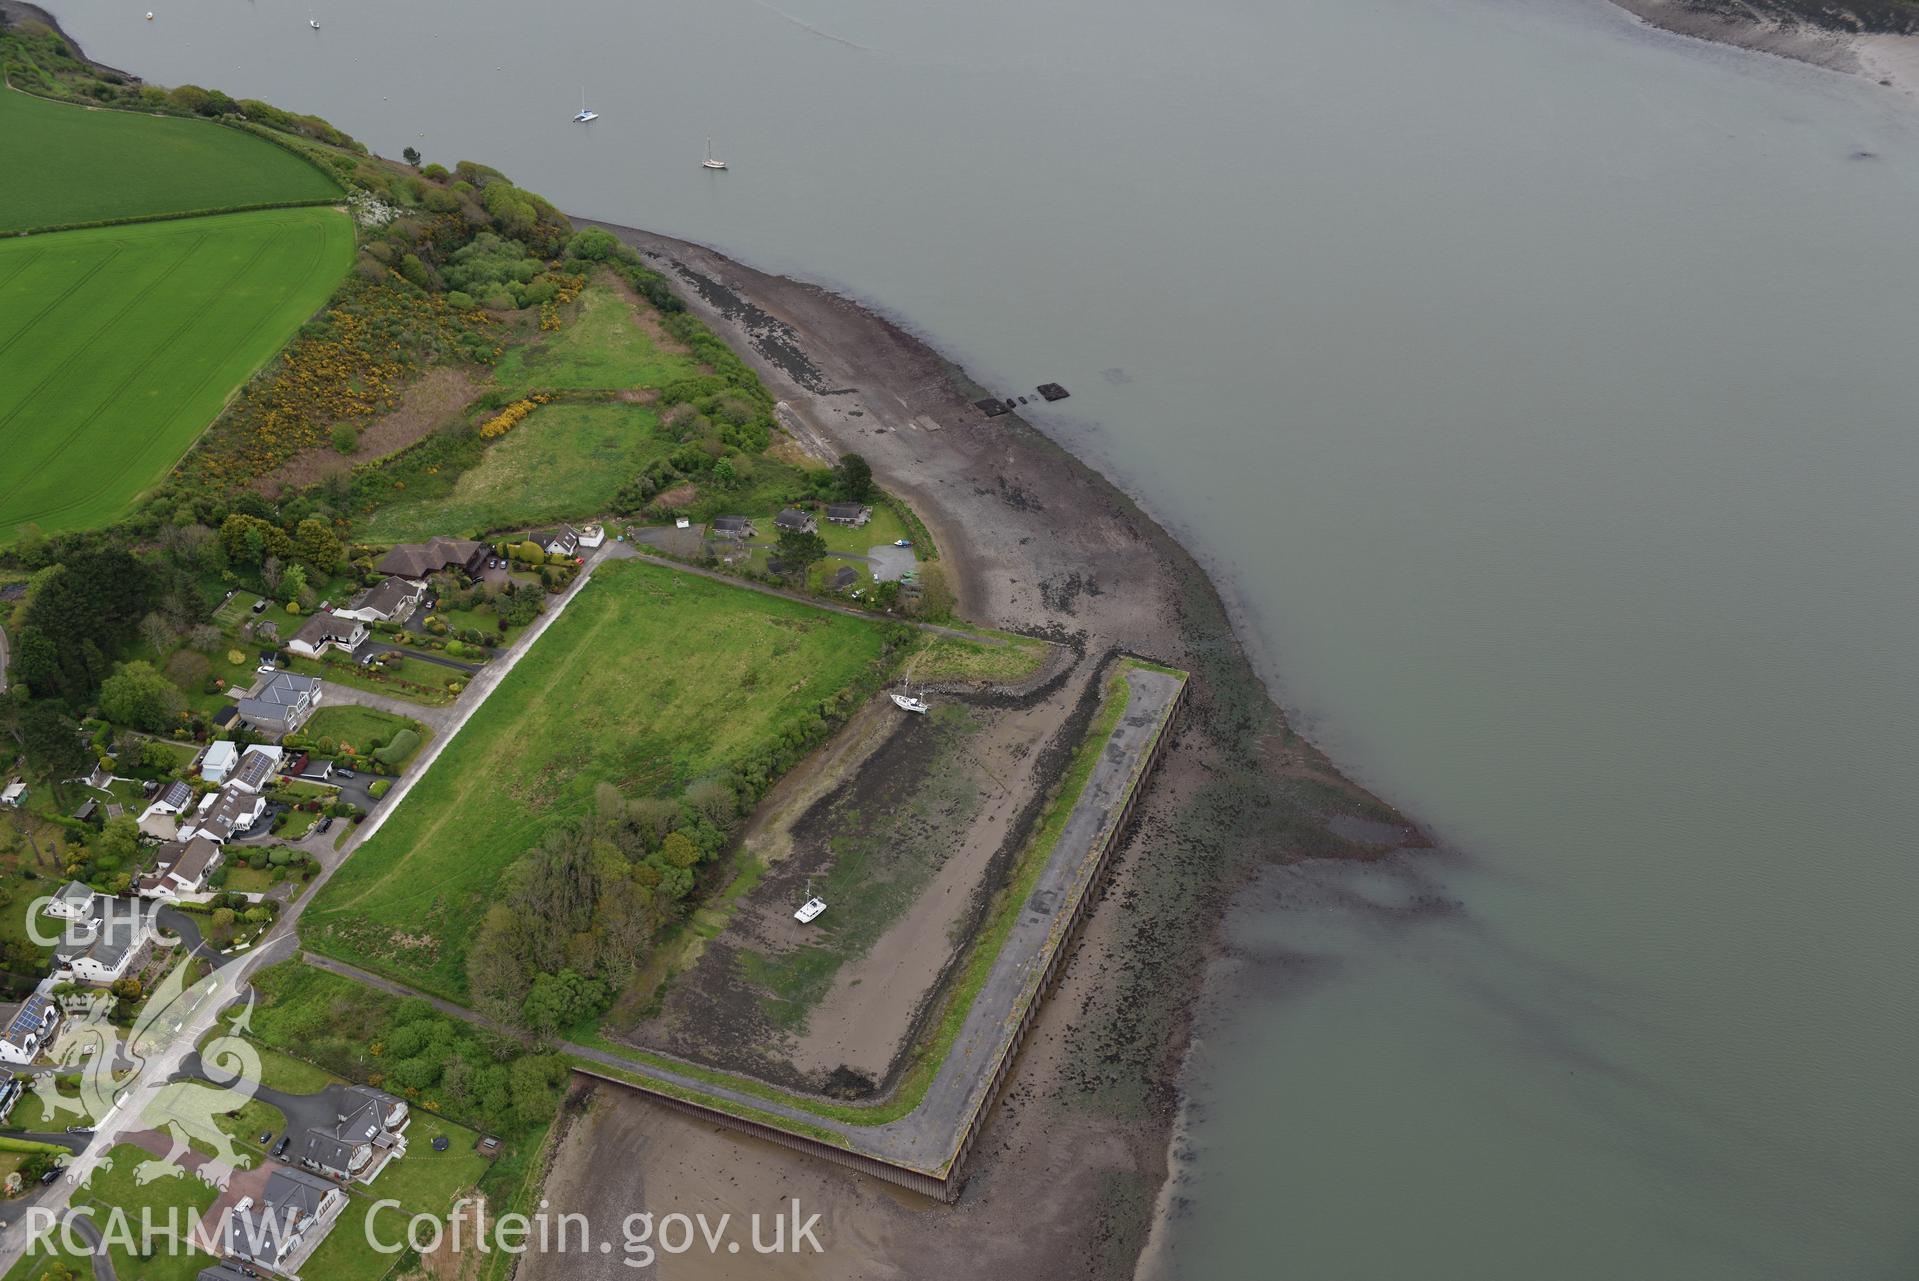 Burton Ferry. Baseline aerial reconnaissance survey for the CHERISH Project. ? Crown: CHERISH PROJECT 2017. Produced with EU funds through the Ireland Wales Co-operation Programme 2014-2020. All material made freely available through the Open Government Licence.